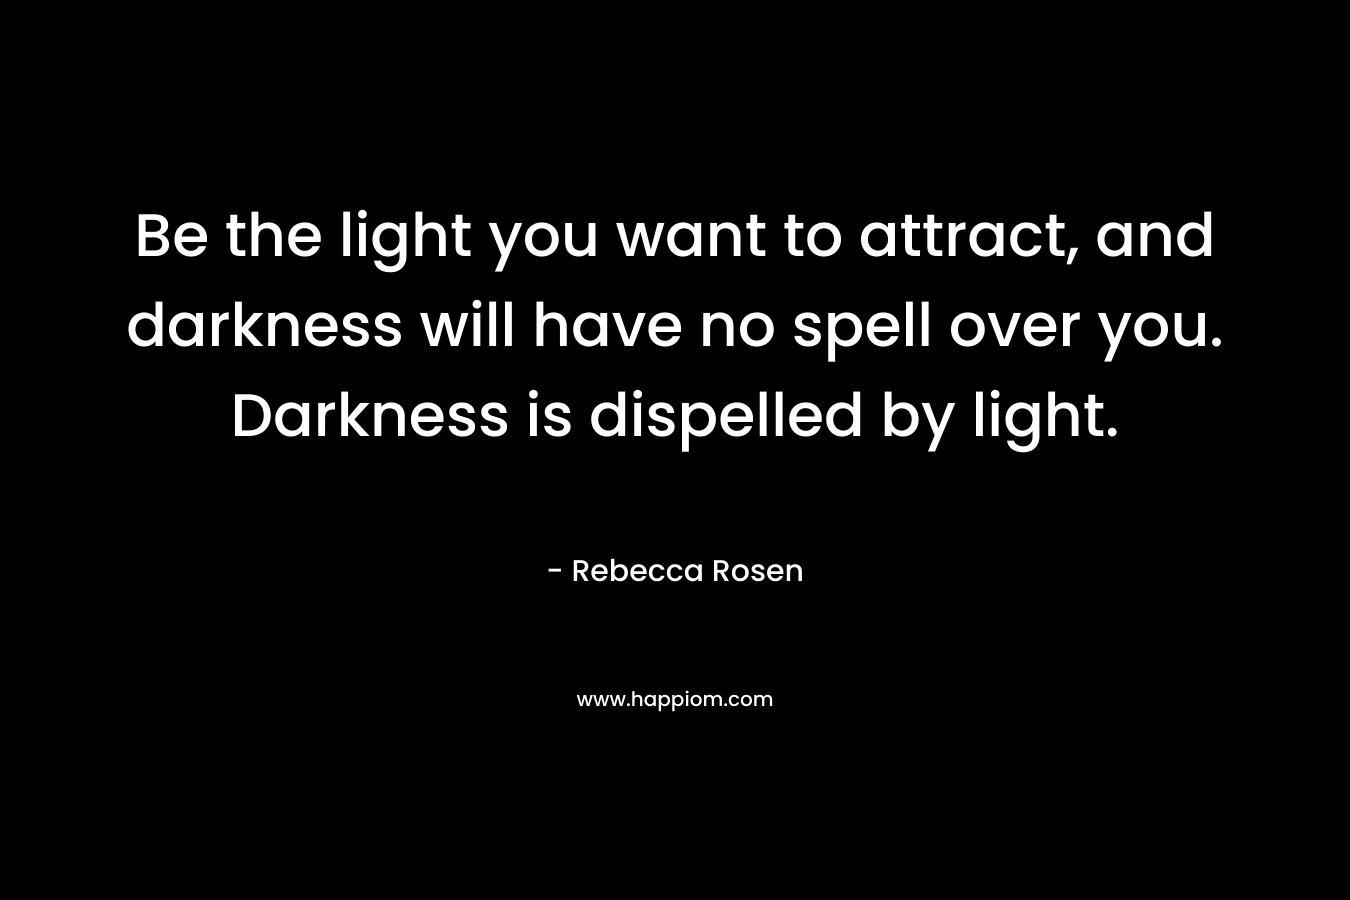 Be the light you want to attract, and darkness will have no spell over you. Darkness is dispelled by light.